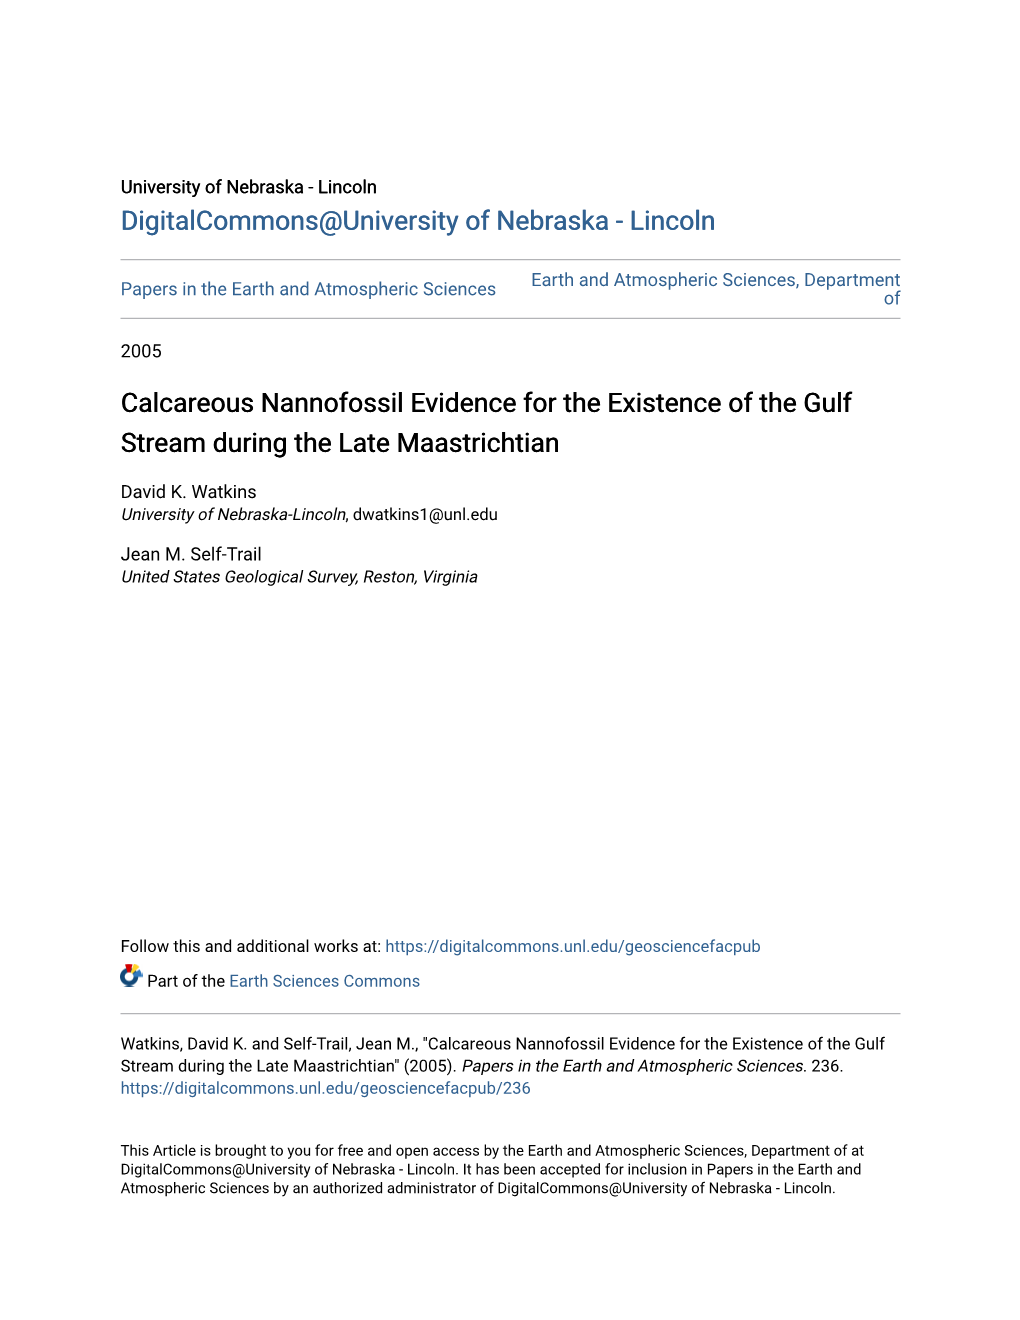 Calcareous Nannofossil Evidence for the Existence of the Gulf Stream During the Late Maastrichtian